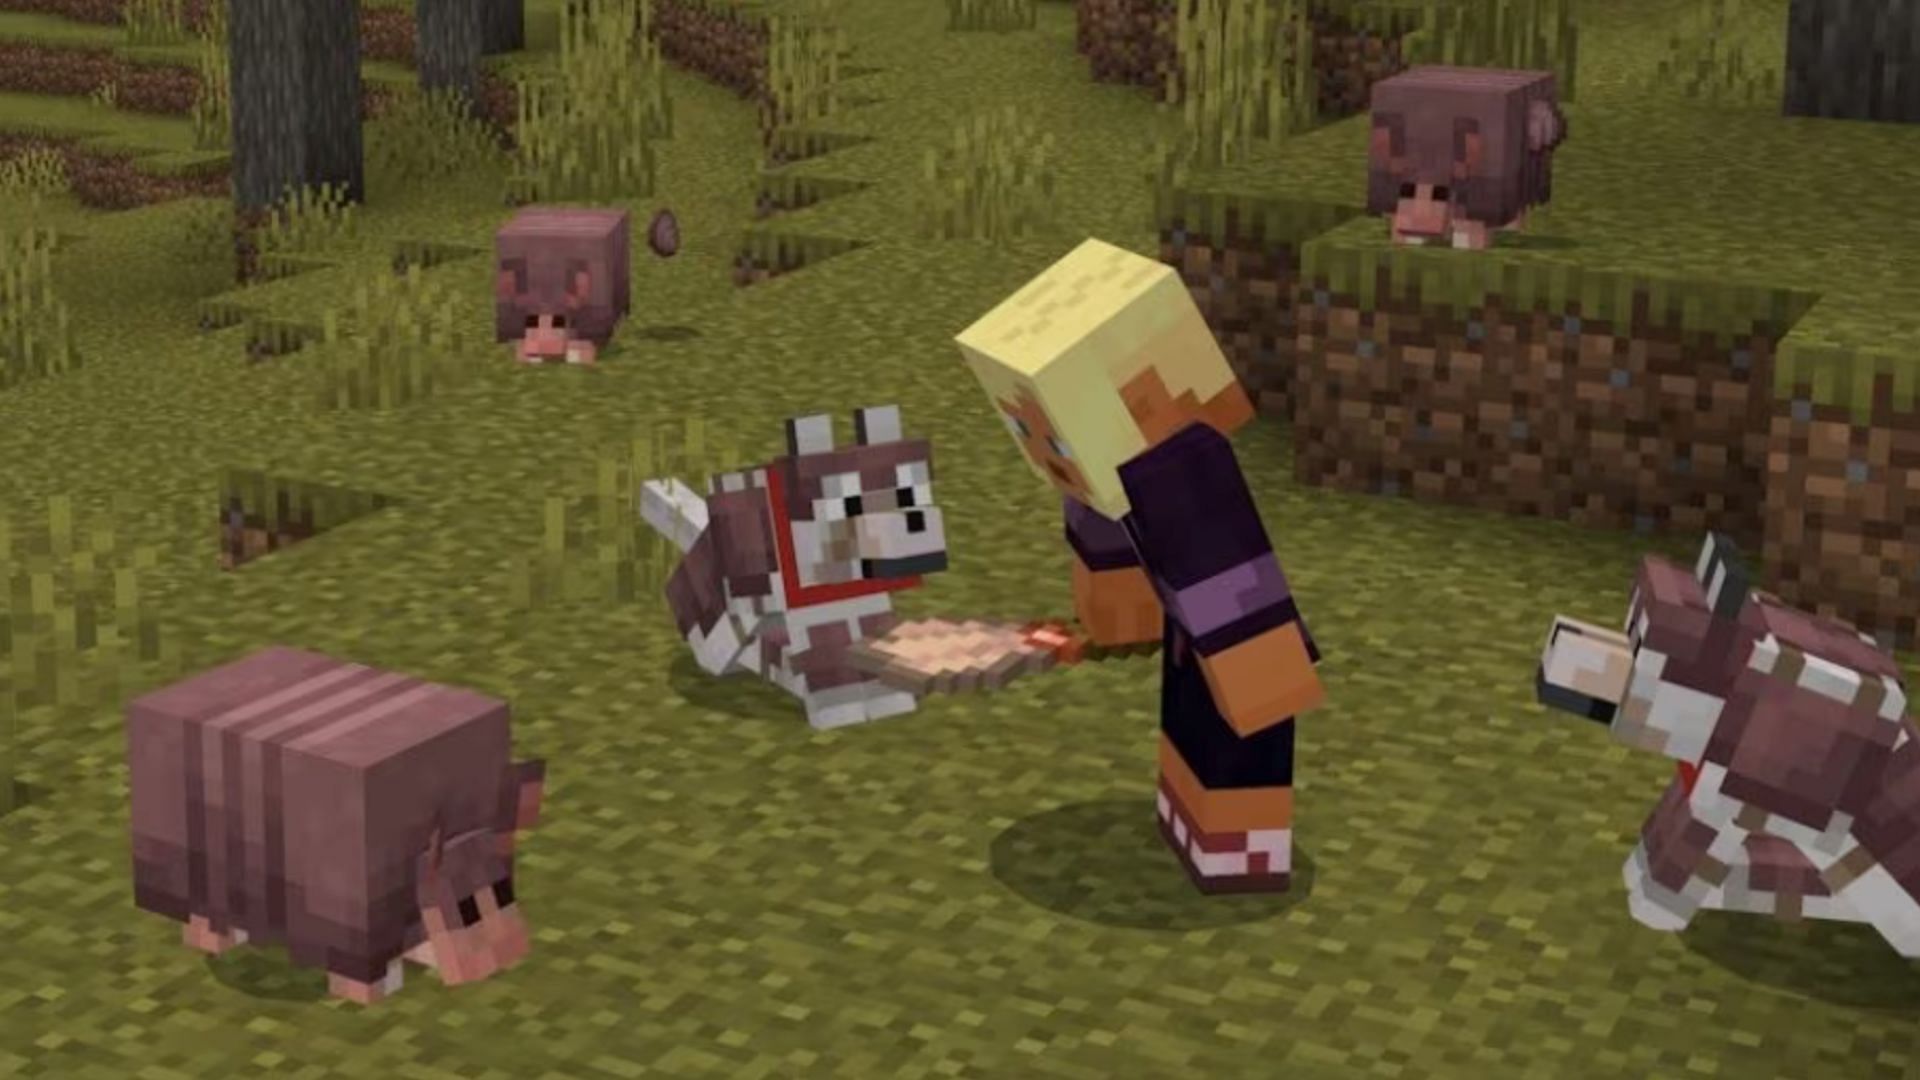 Preview features can now be accessed on PlayStation 4 (image via Mojang Studios)